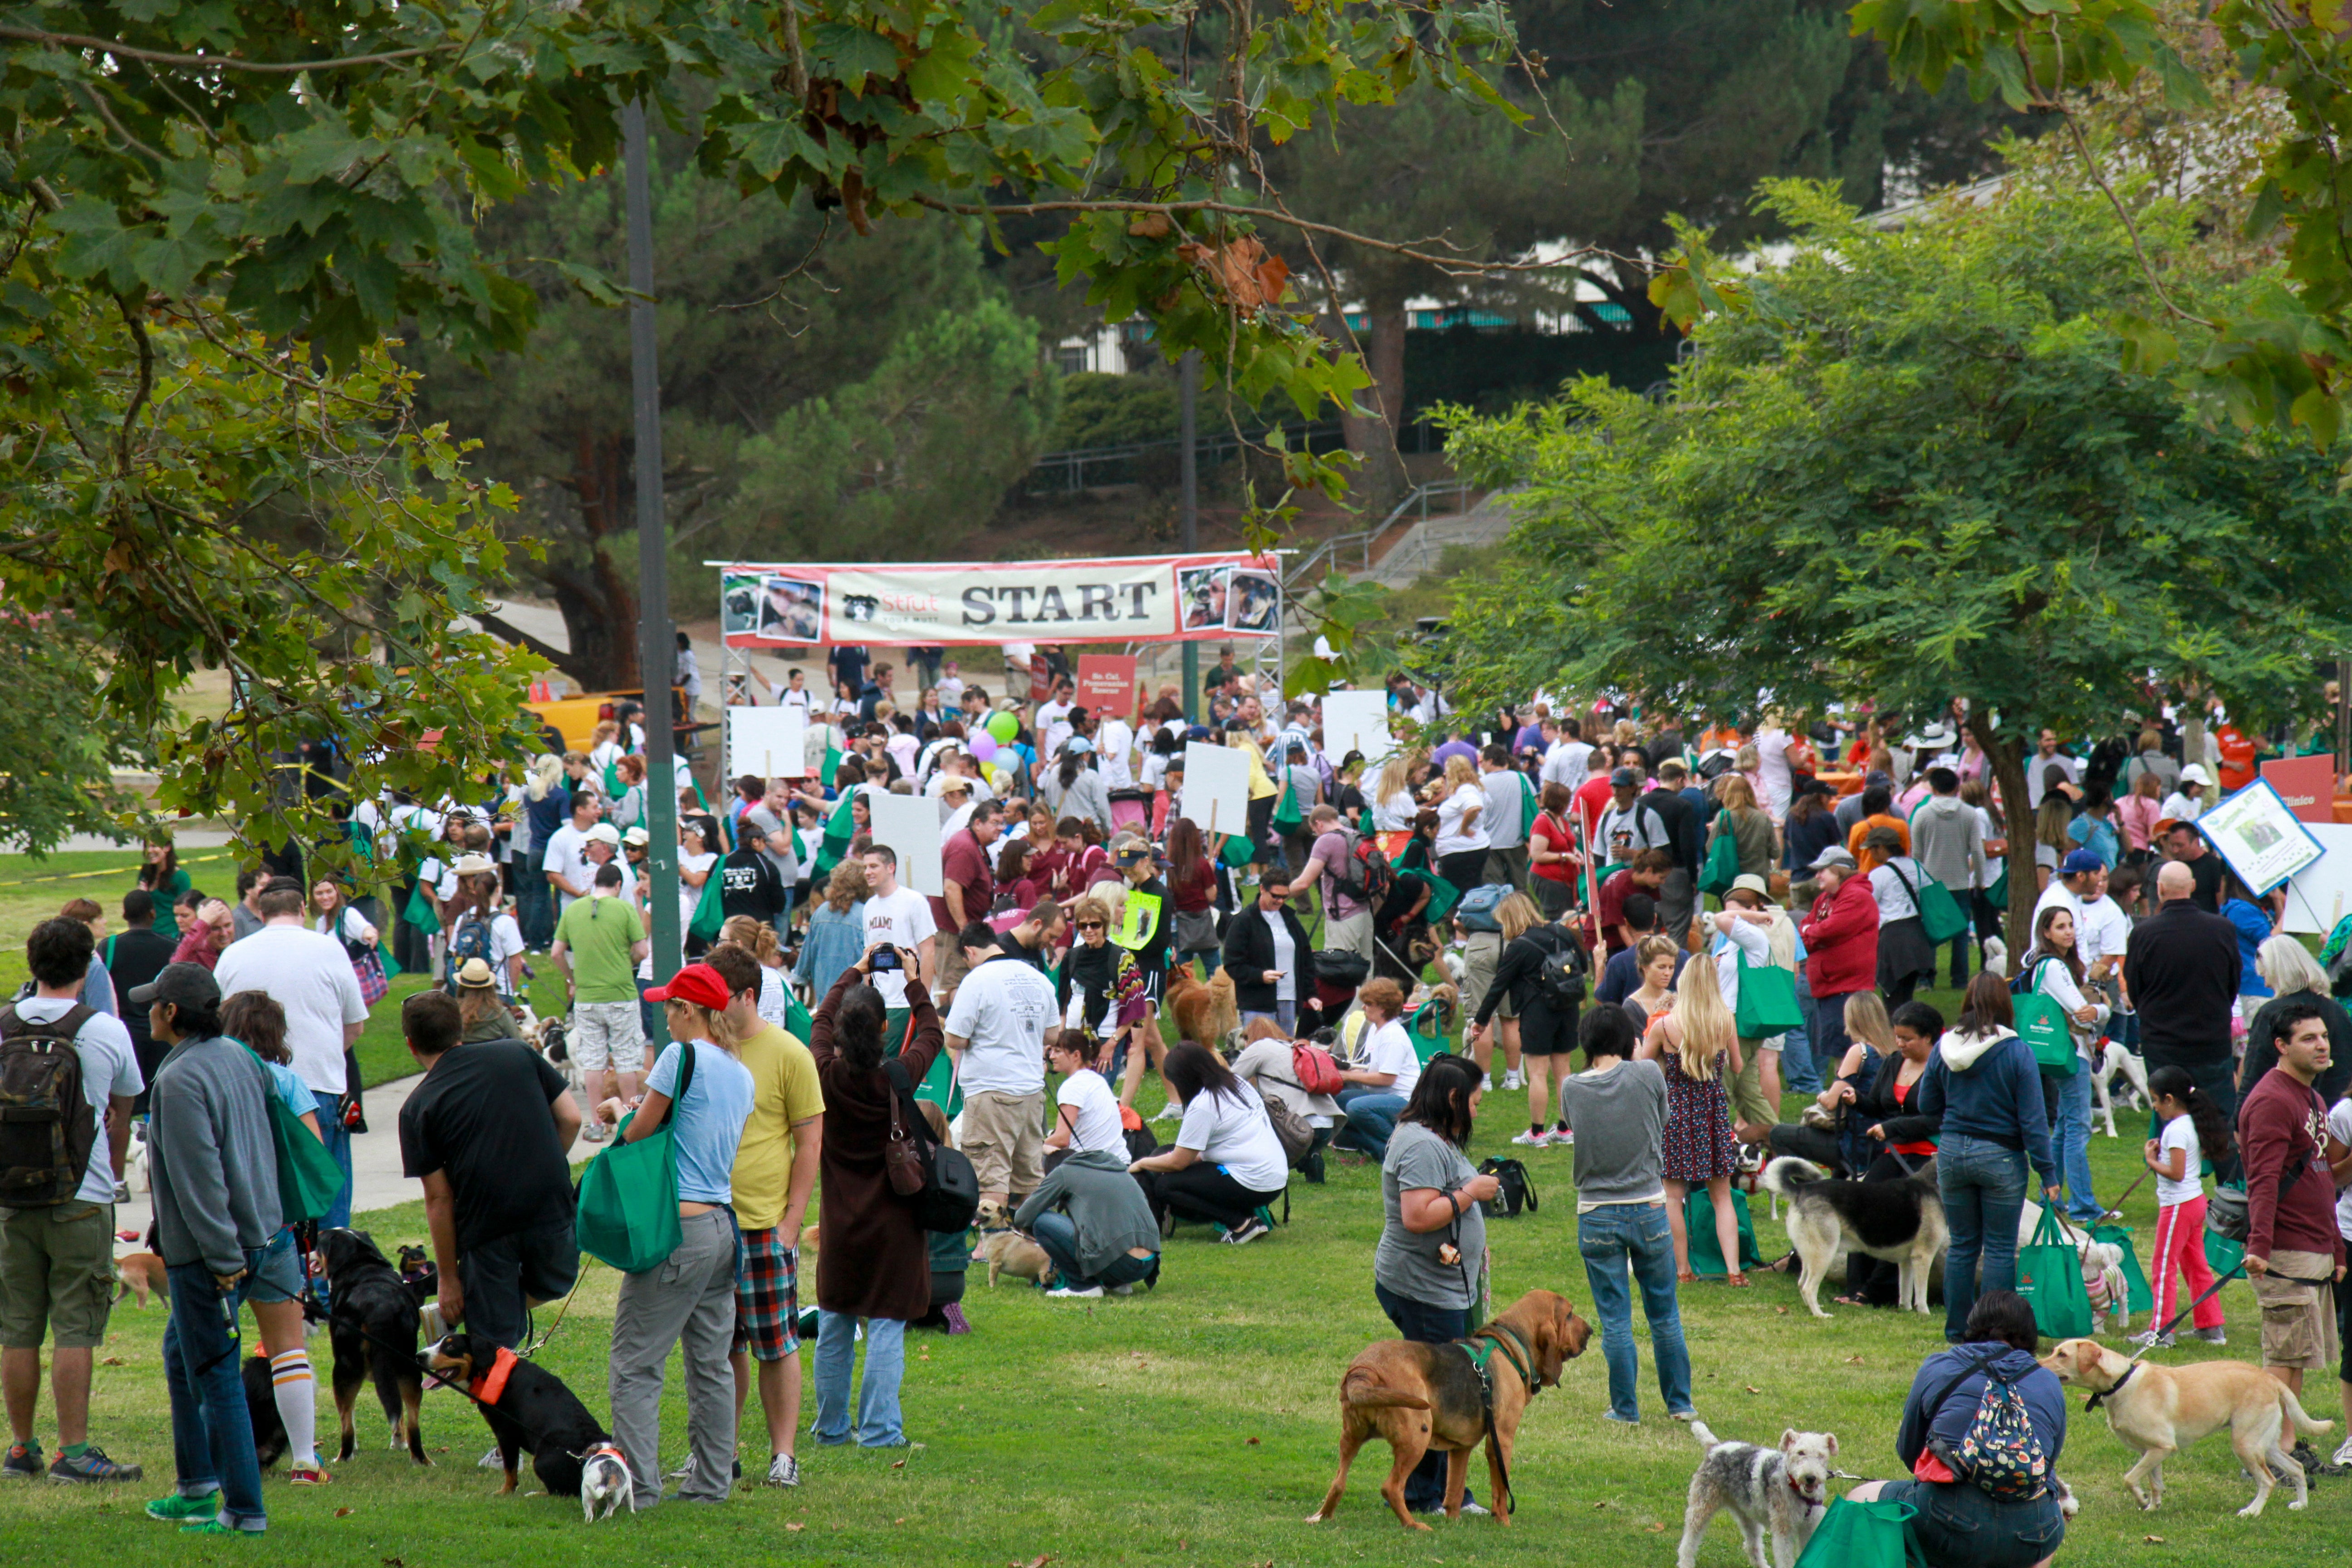 In 2011, a large community of 1,500 animal lovers gathered in Los Angeles and raised over $280,000 to save the lives of homeless pets locally and across the country.